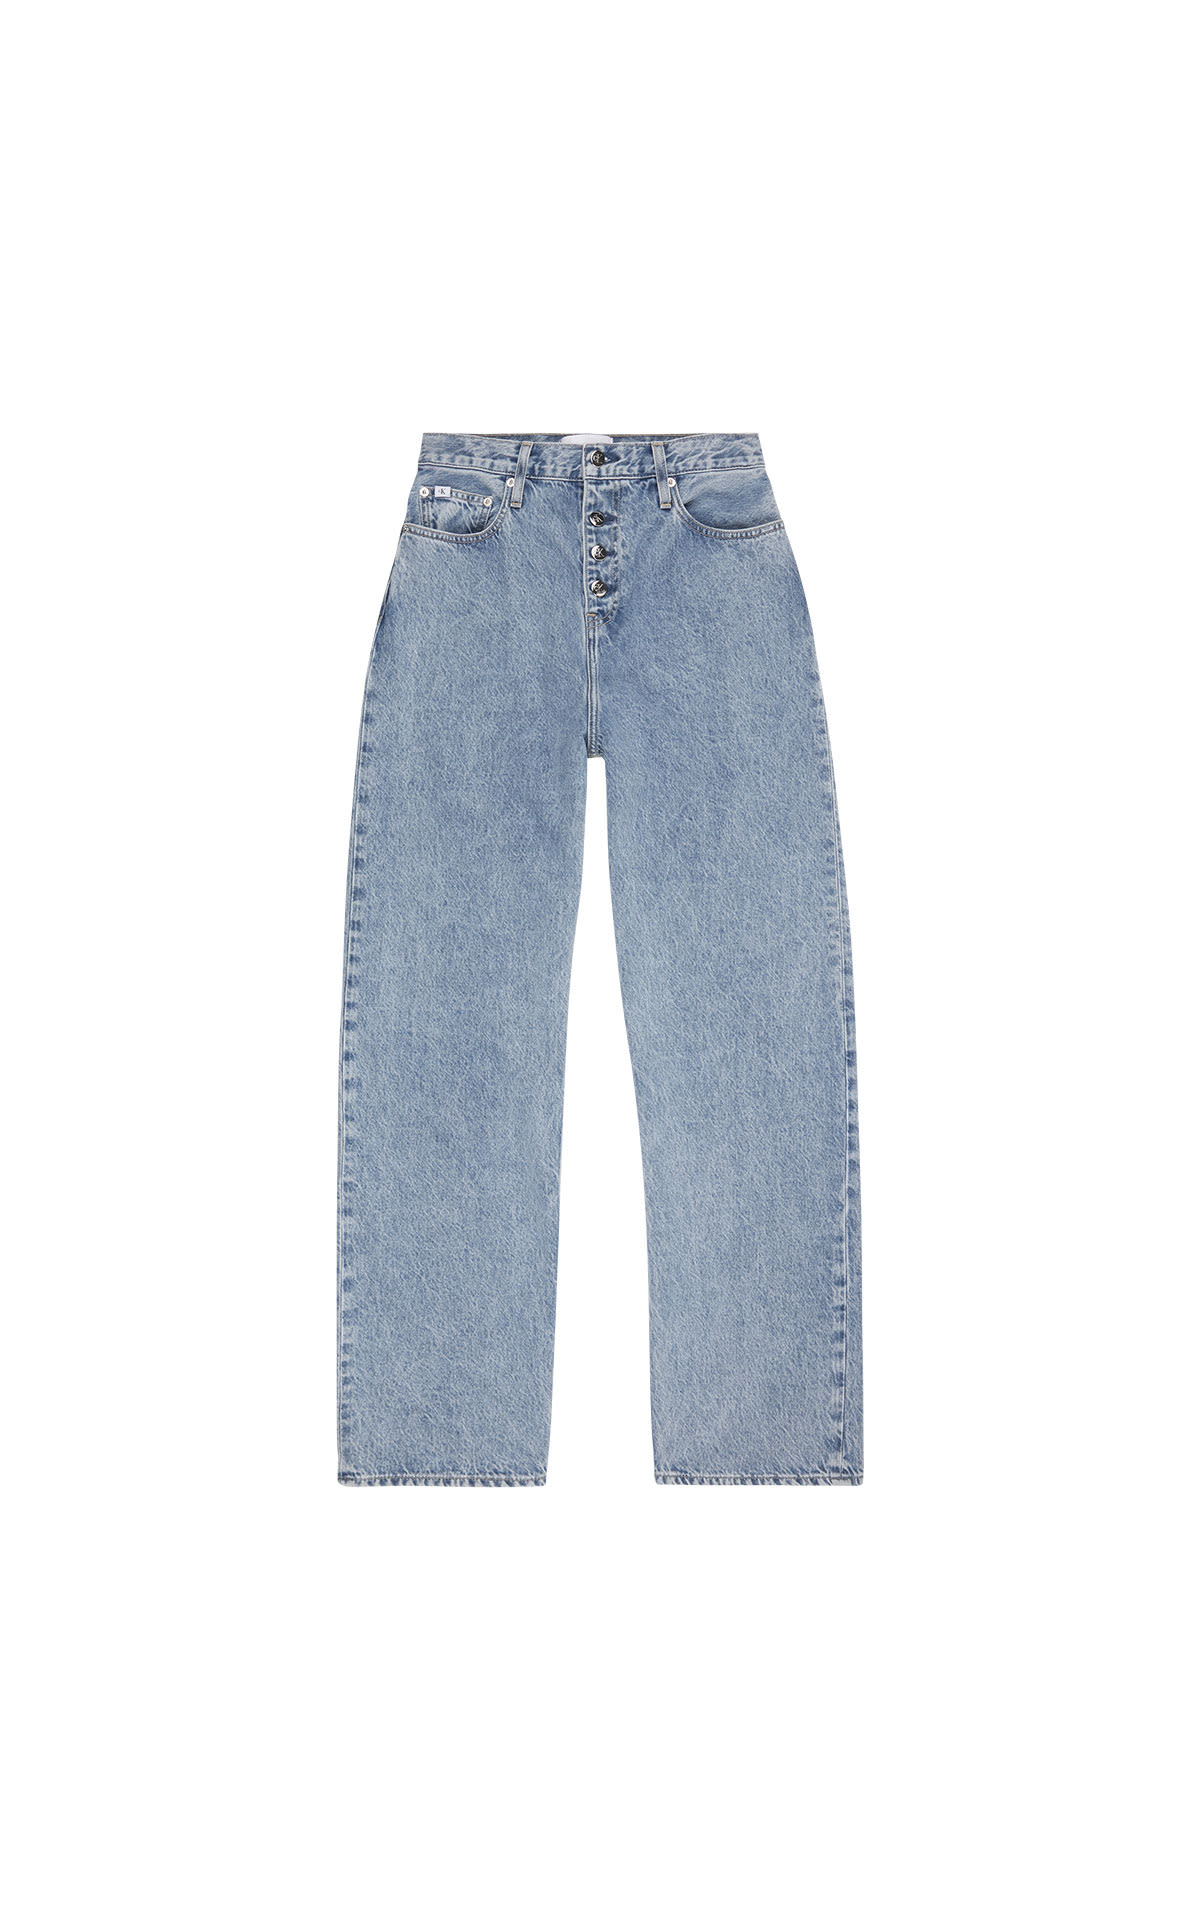 CK Jeans Relaxed fit denim from Bicester Village